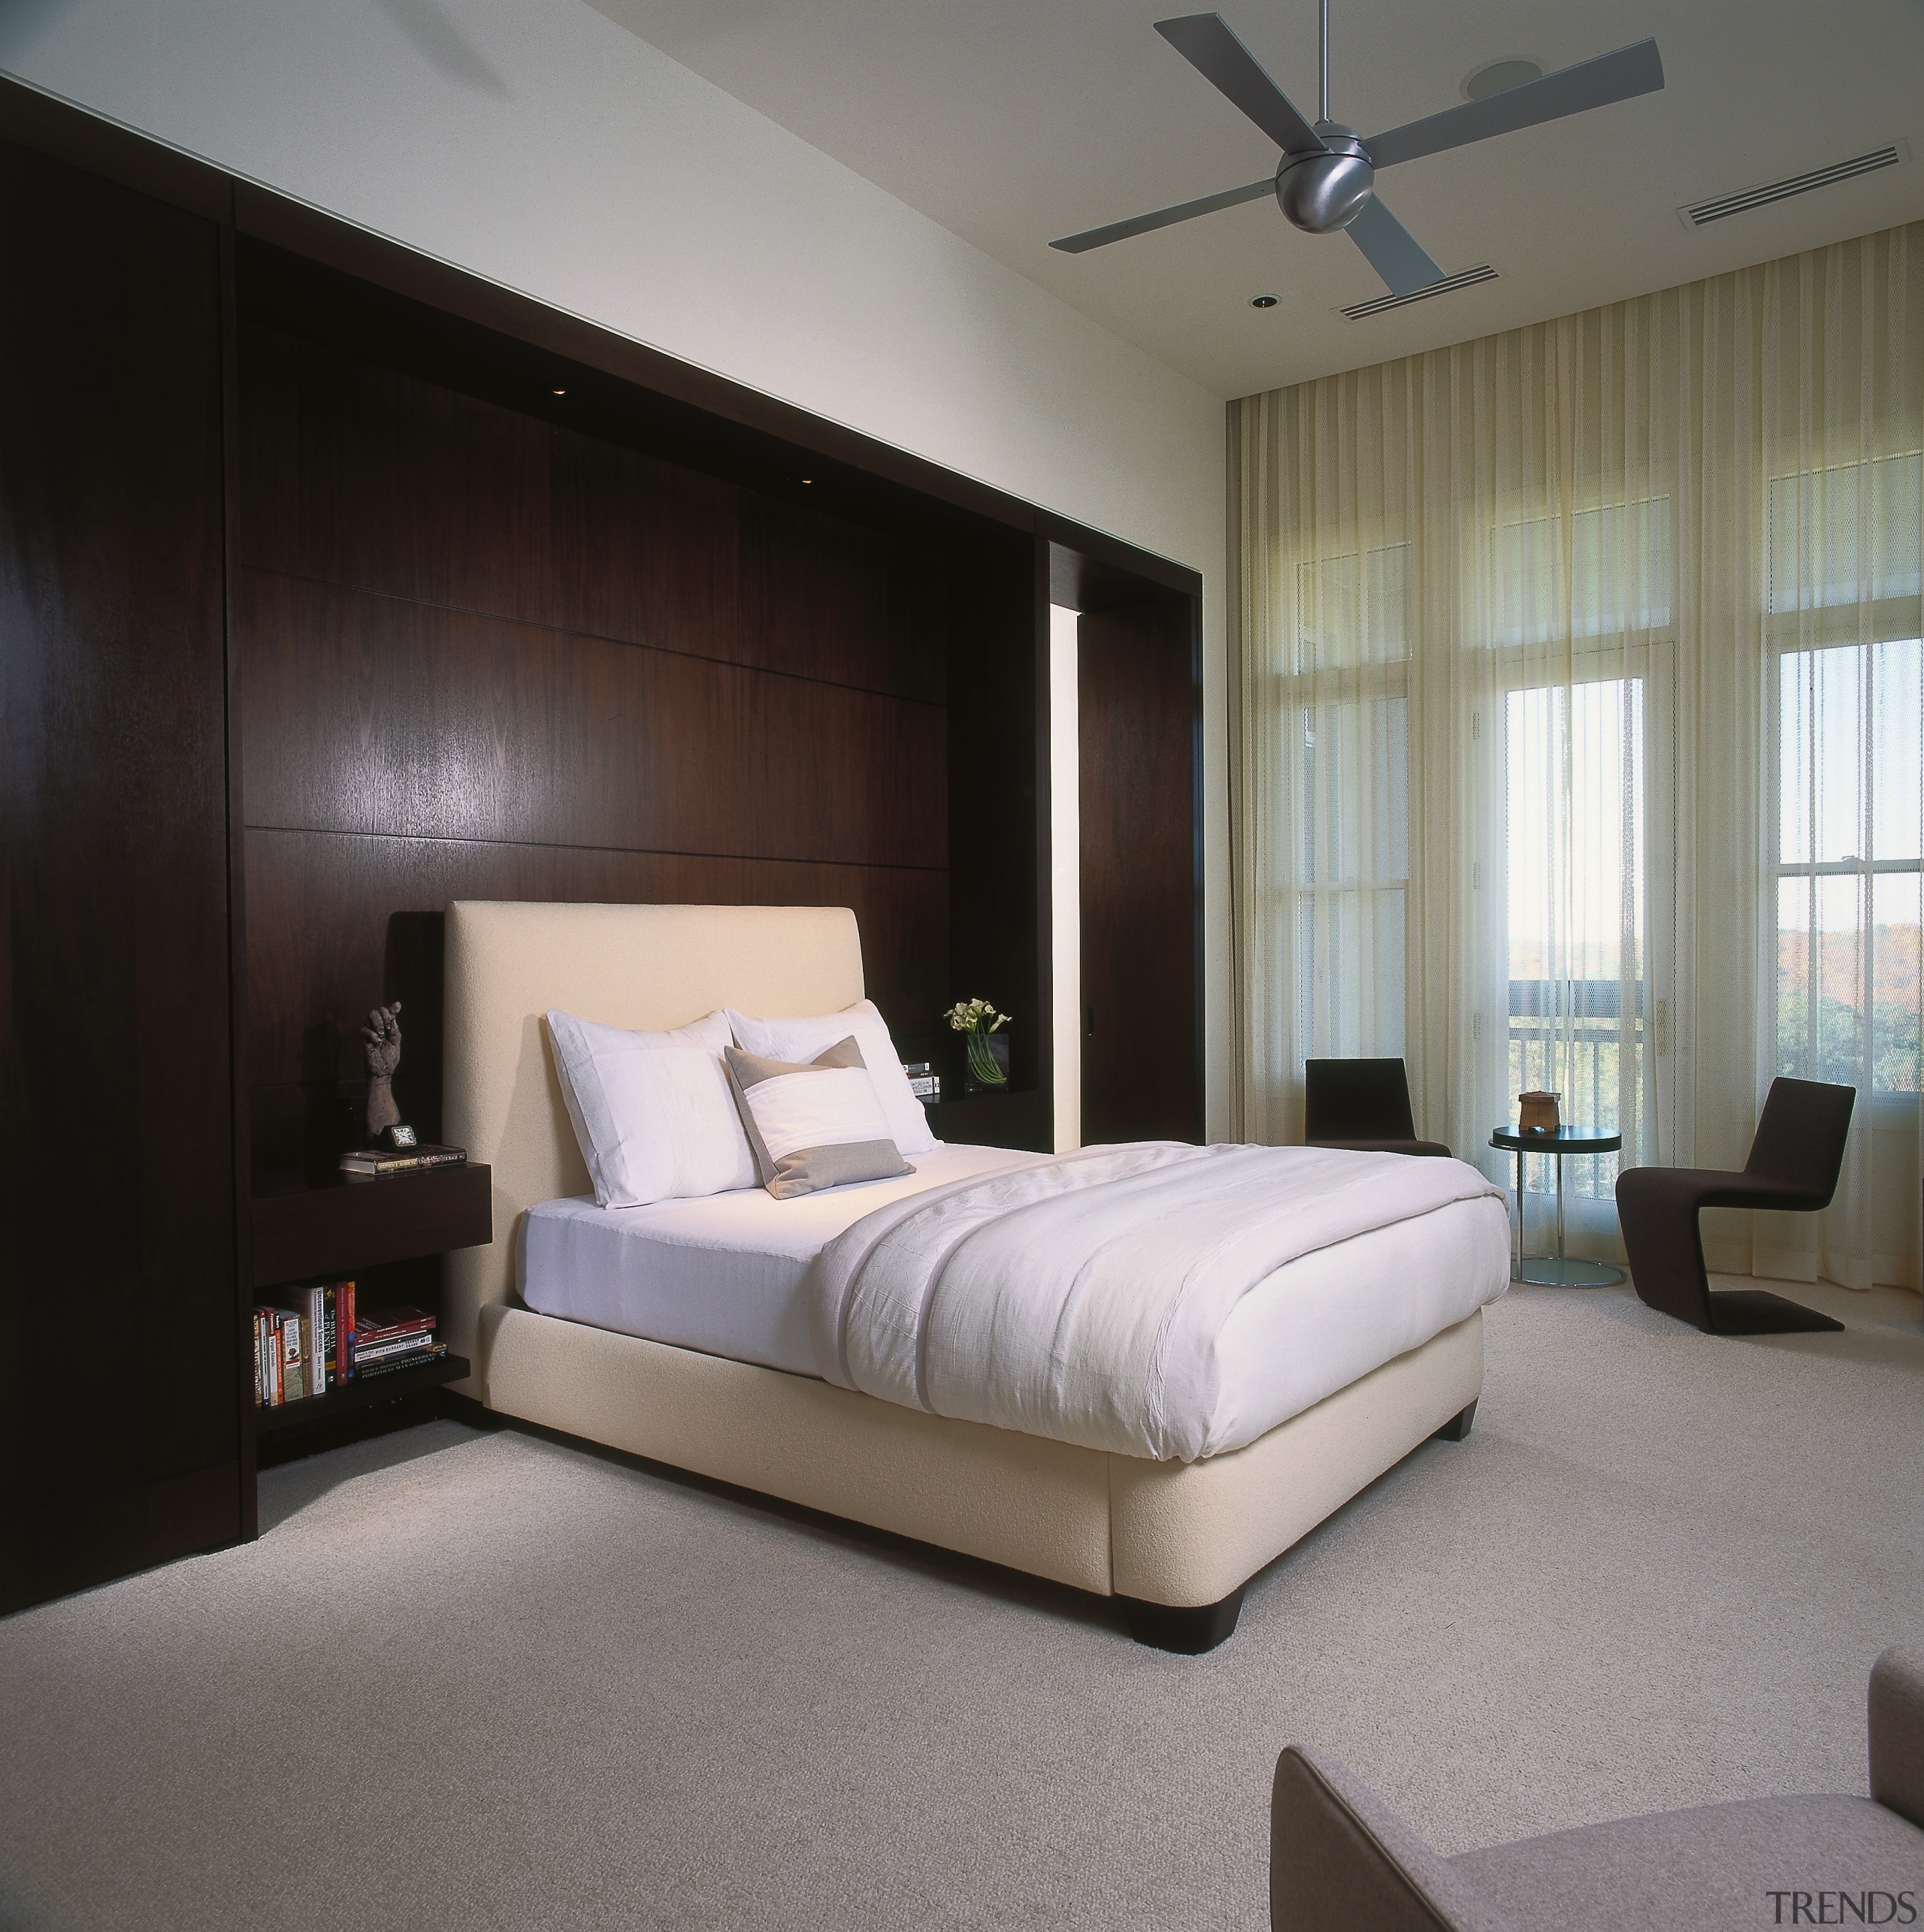 A view of the master bedroom, carpet, wooden bed, bed frame, bedroom, ceiling, floor, furniture, interior design, mattress, room, wall, window, window covering, gray, black